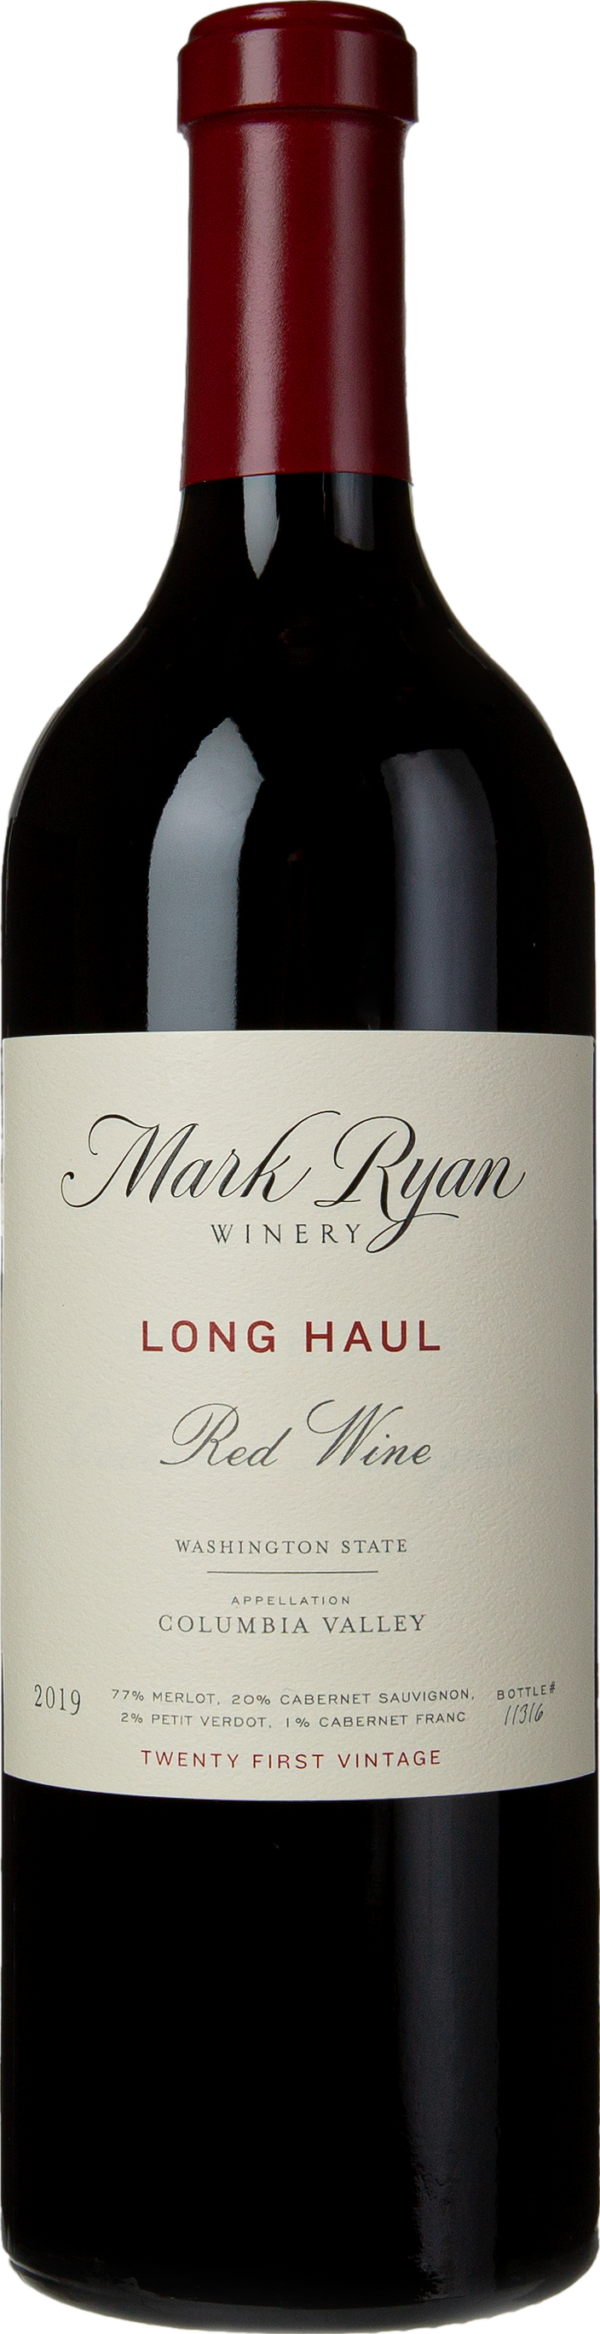 Product image of Mark Ryan Long Haul 2019 from 8wines